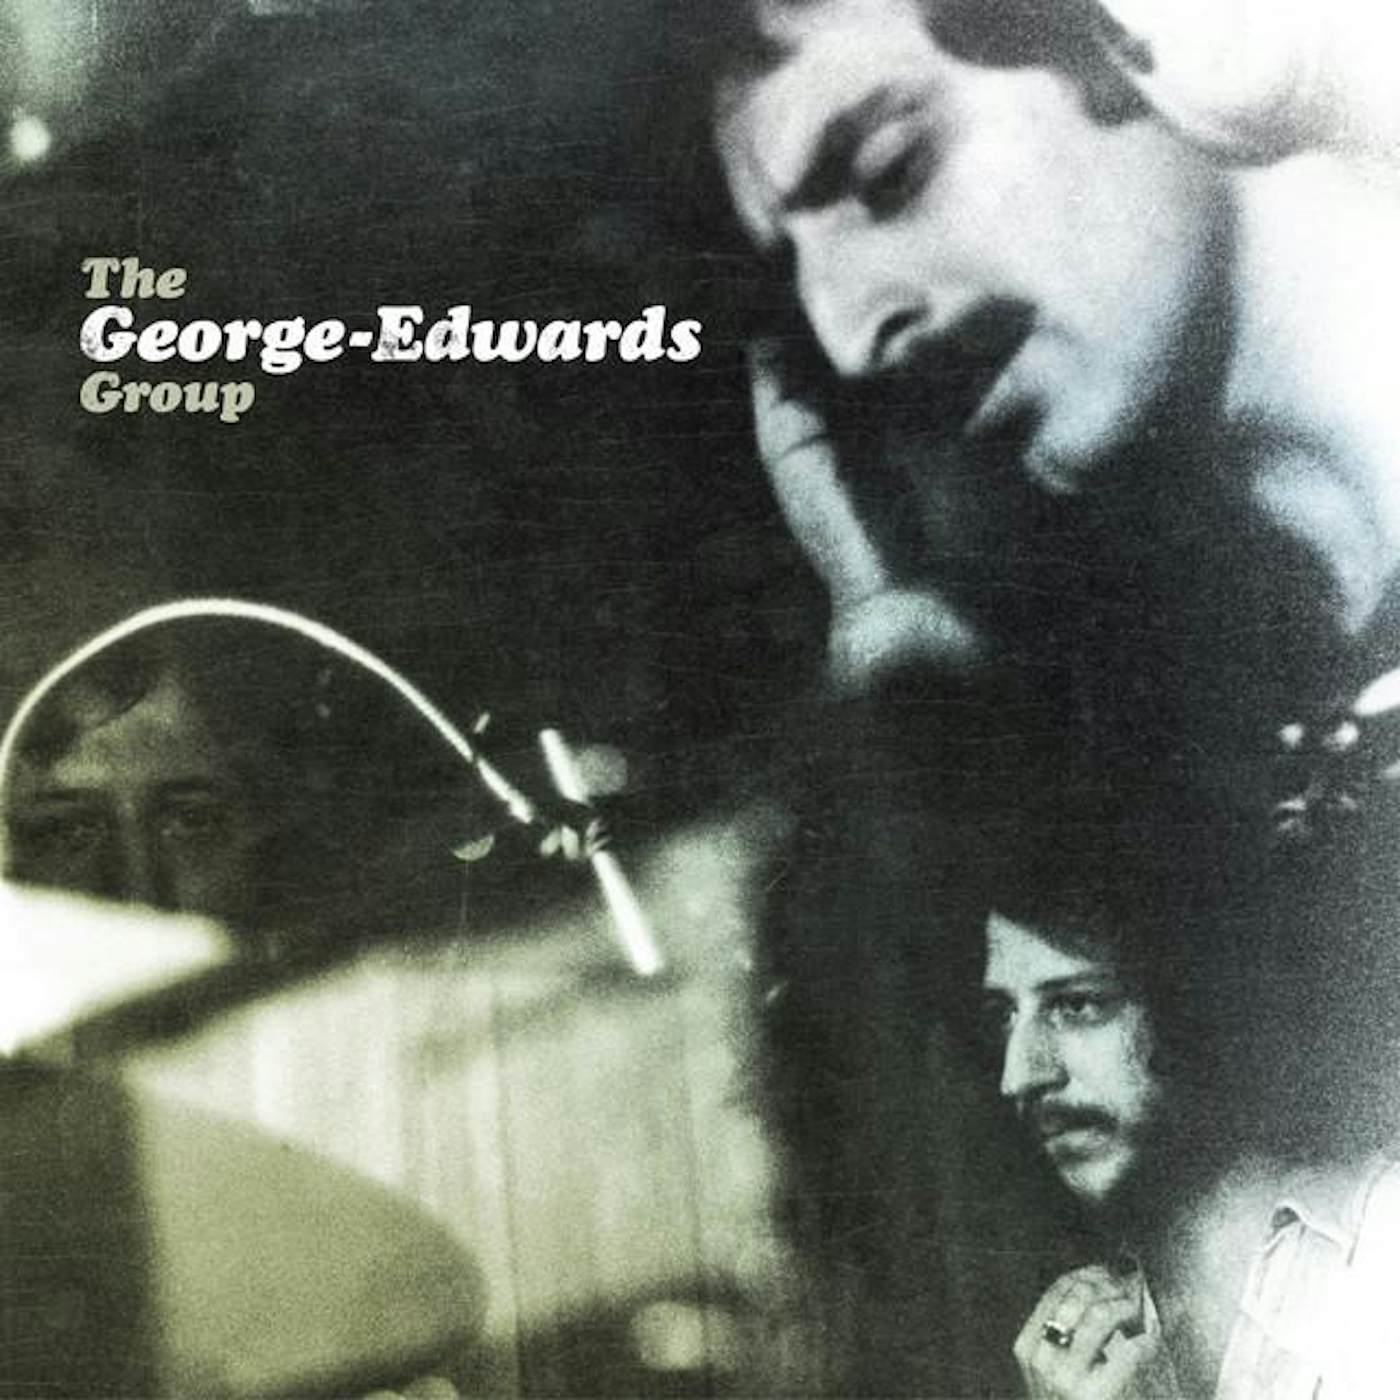 The George-Edwards Group